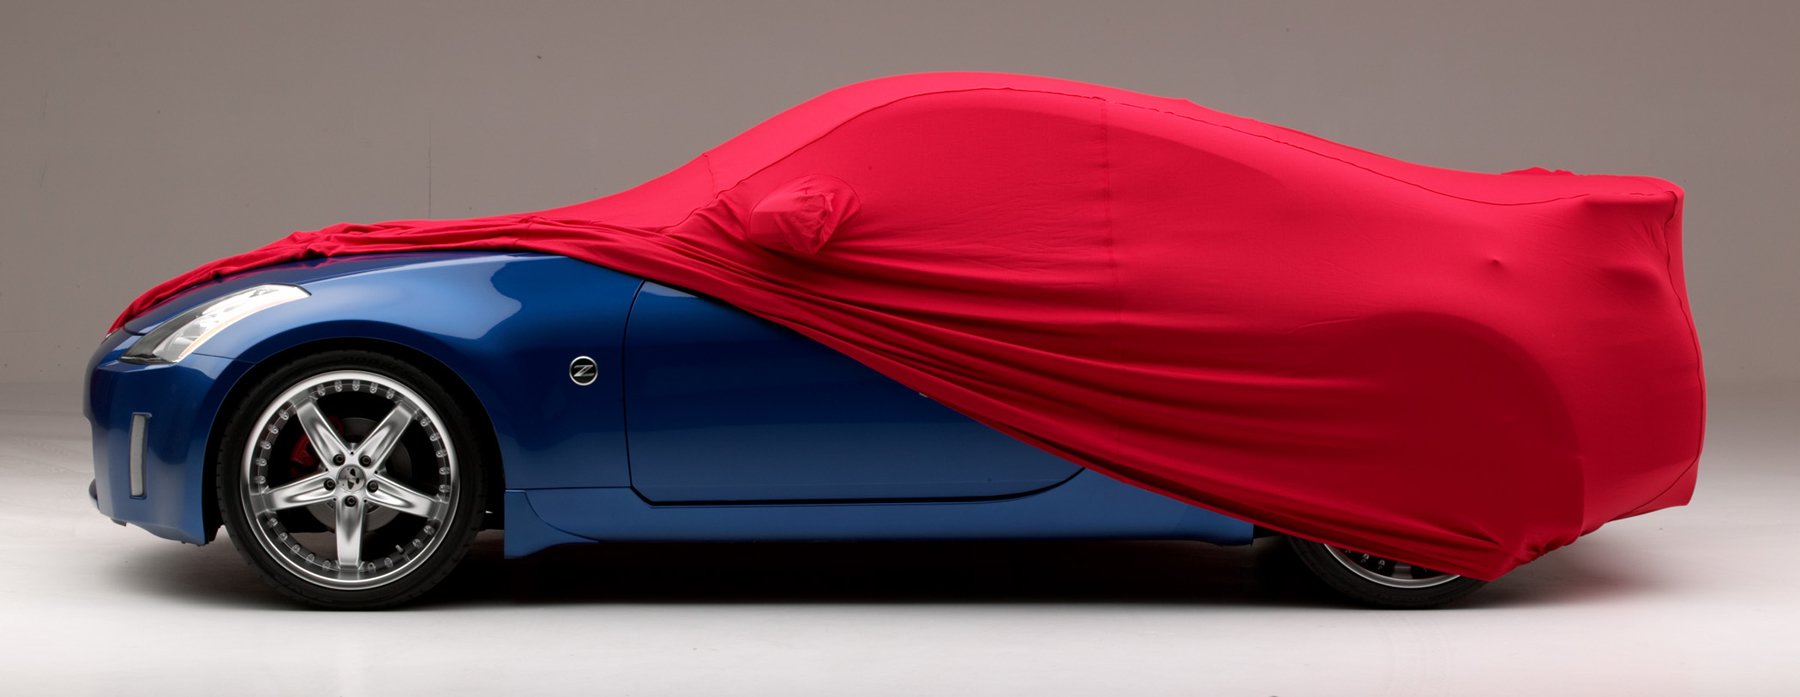 Some Good Reasons to Buy a Car Cover